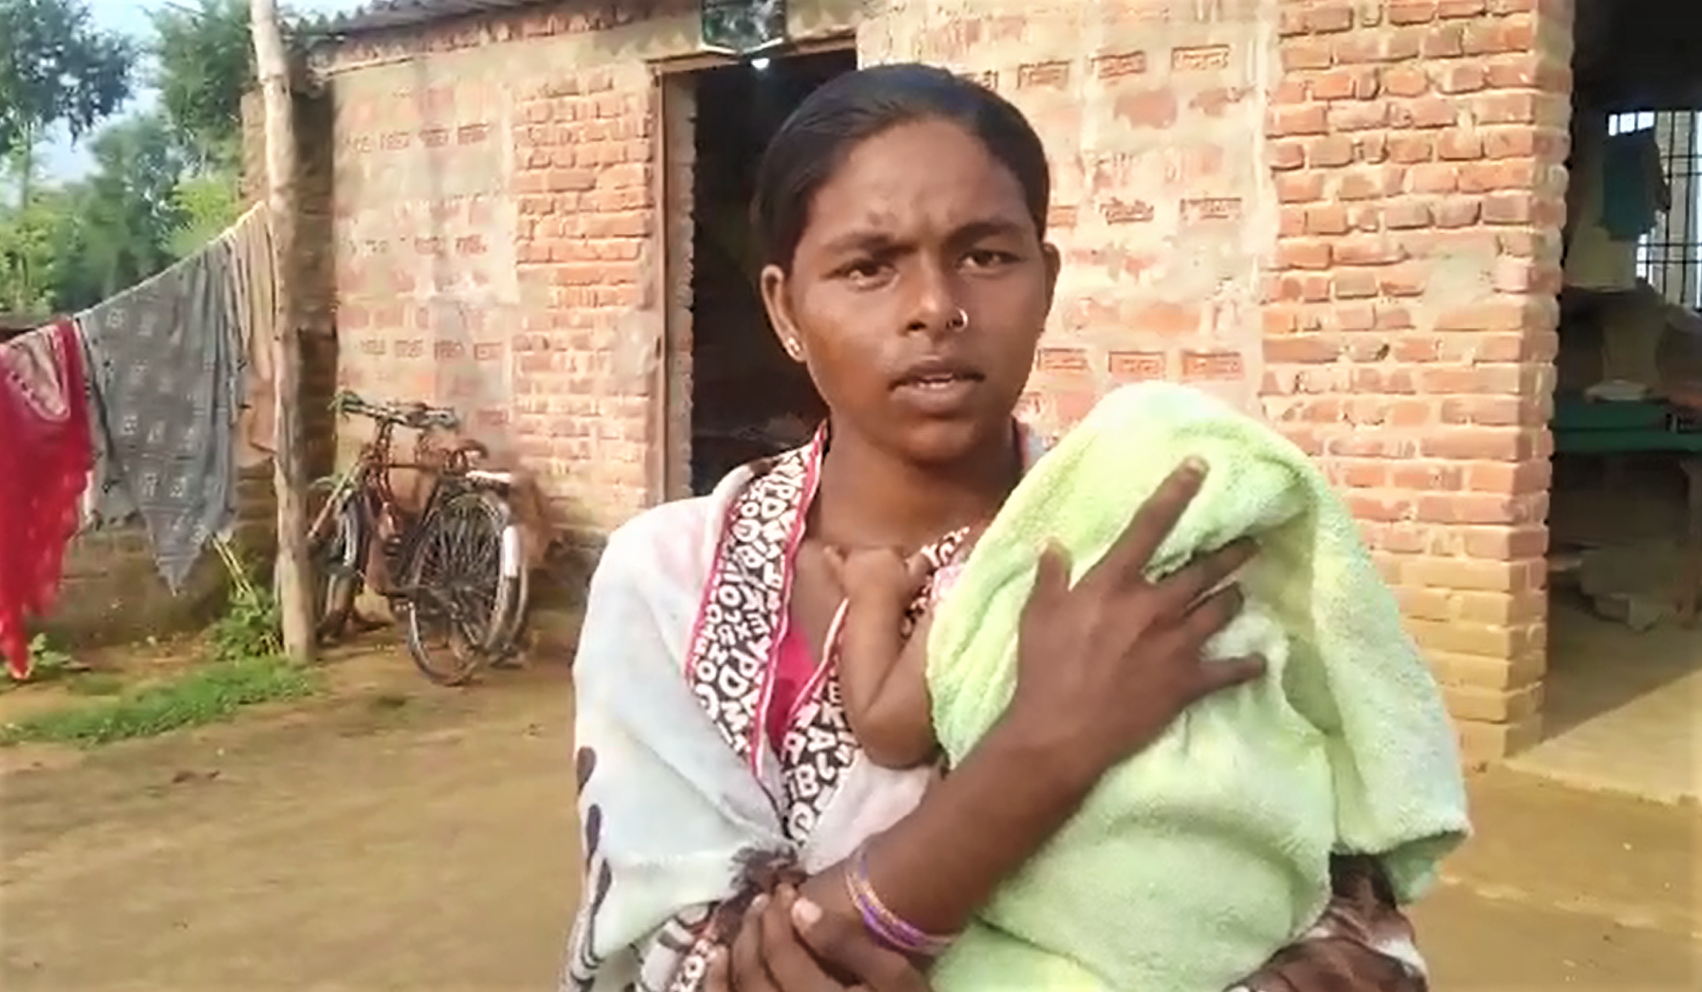  Punita Kumari and her family were attacked in Bihar state, India on Sept. 14, 2020. (Morning Star News)